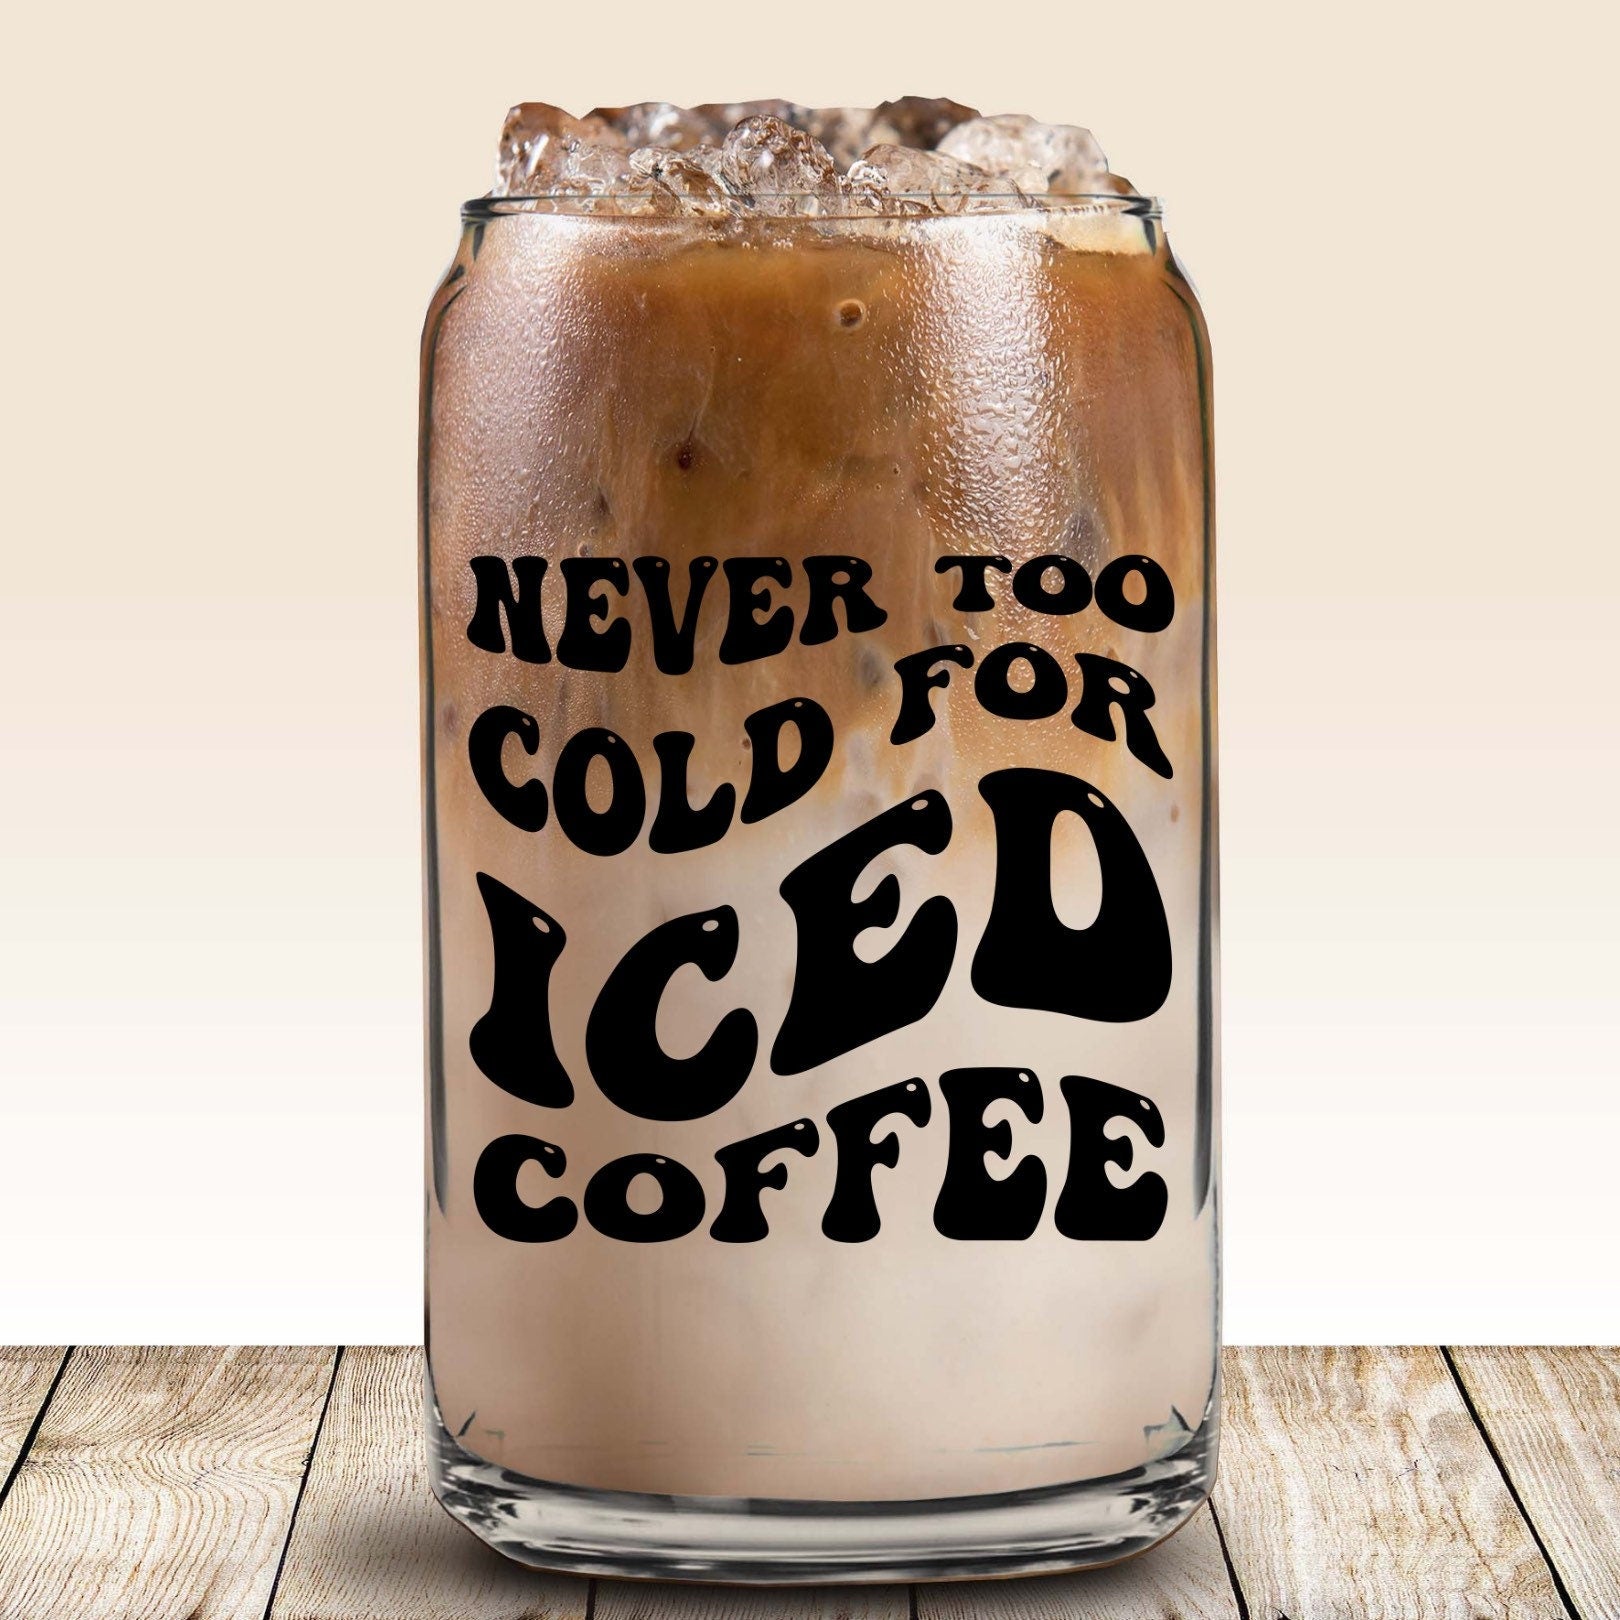 Libbey Glass, Never Too Cold For Iced Coffee Libbey Glass, Iced Coffee Cup